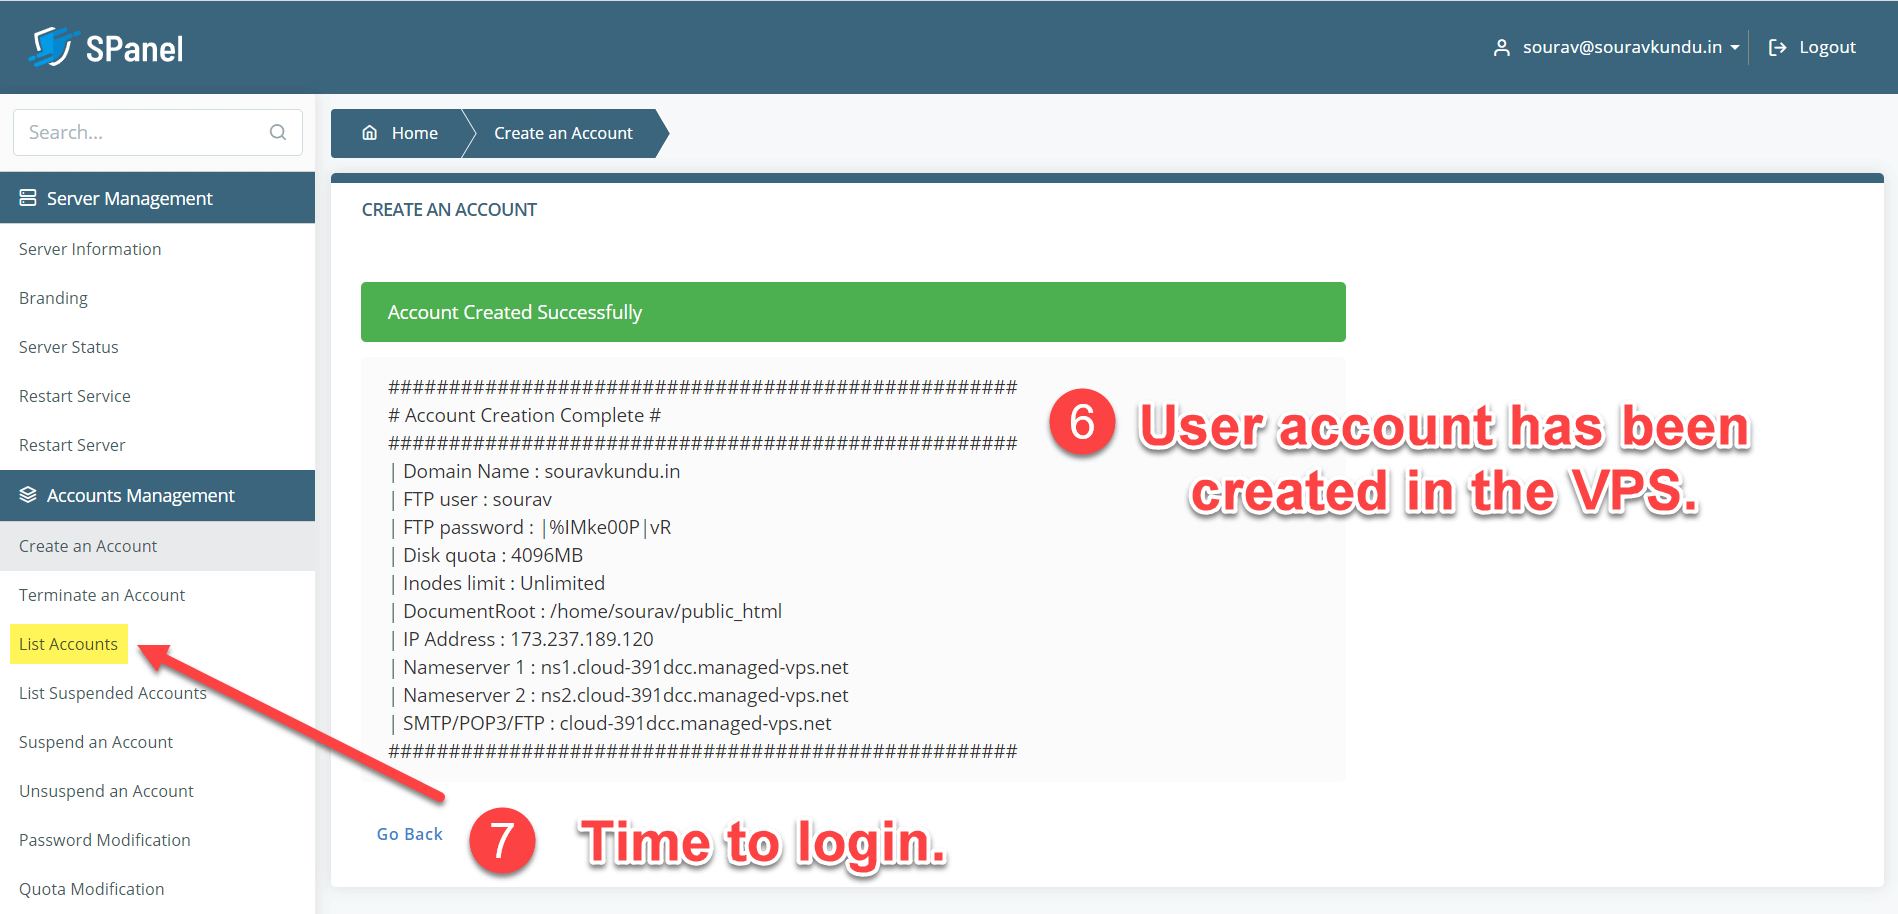 How to create a new user account in Scala spanel VPS 3